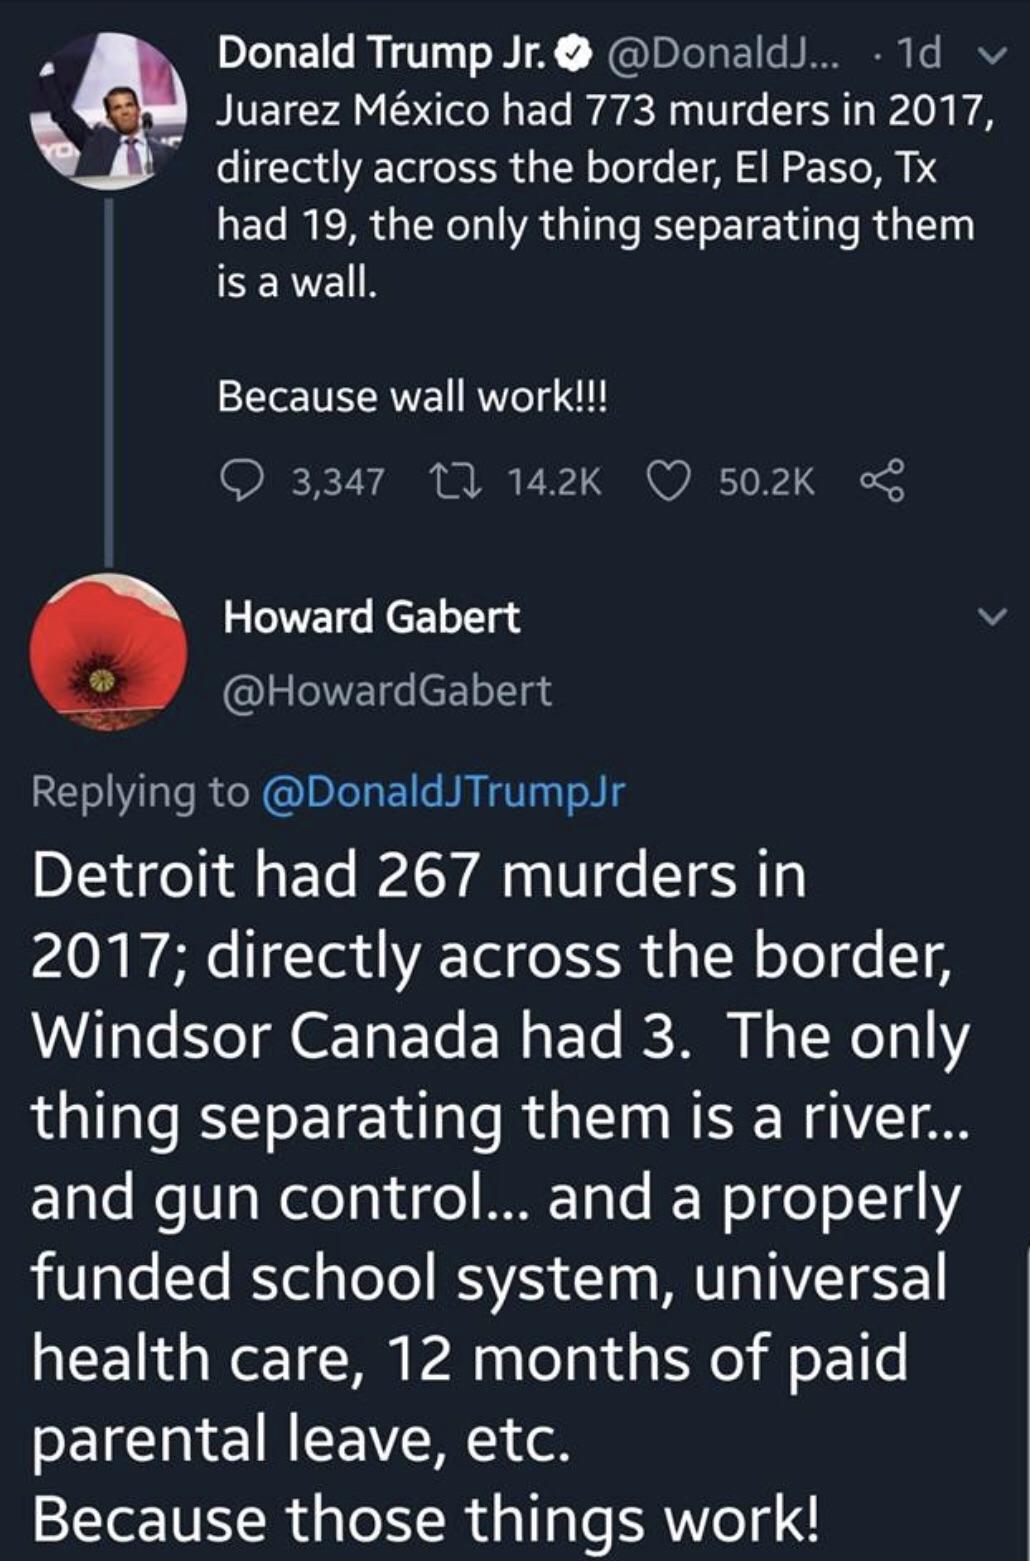 quotes - Donald Trump Jr. ... .1d v Juarez Mxico had 773 murders in 2017, directly across the border, El Paso, Tx had 19, the only thing separating them is a wall. Because wall work!!! 3,347 27 8 Howard Gabert Detroit had 267 murders in 2017; directly acr